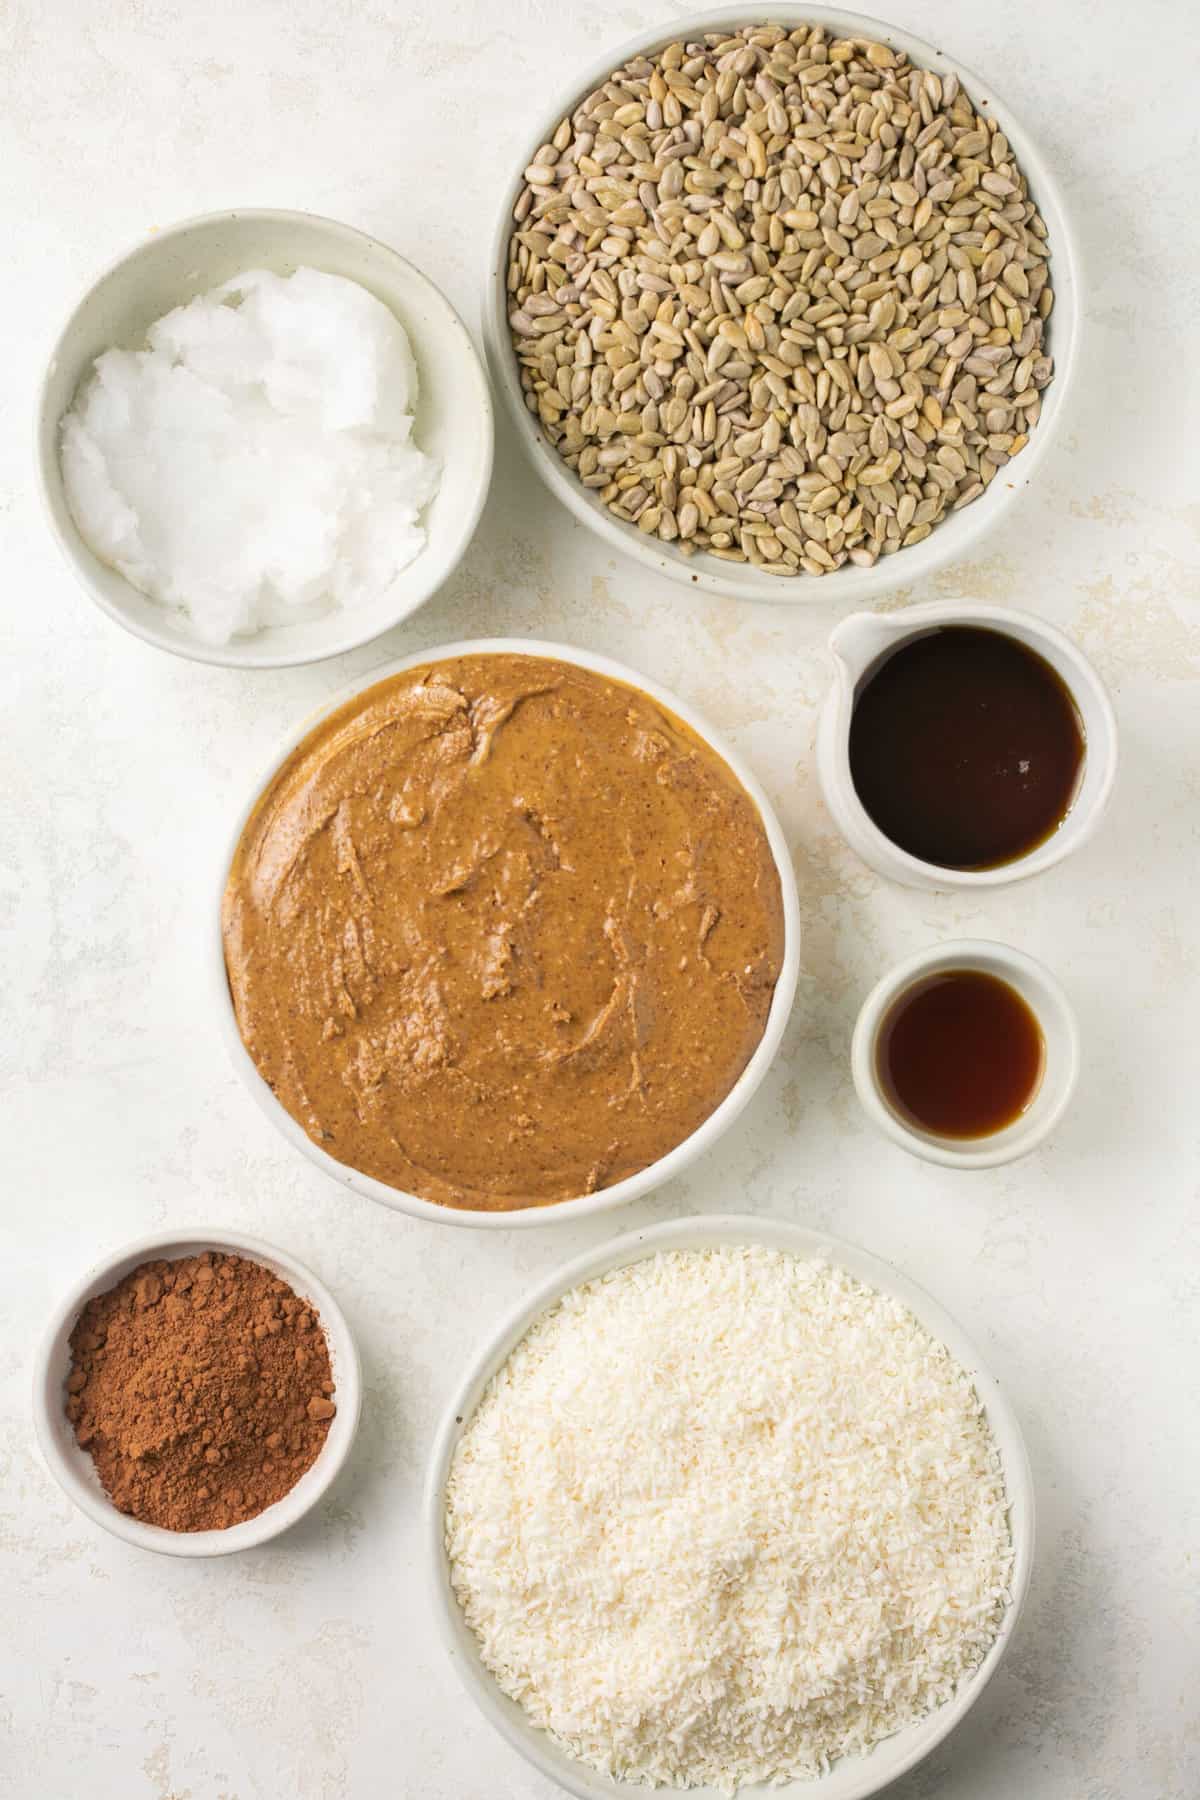 The ingredients needed to make homemade almond butter bars with chocolate.